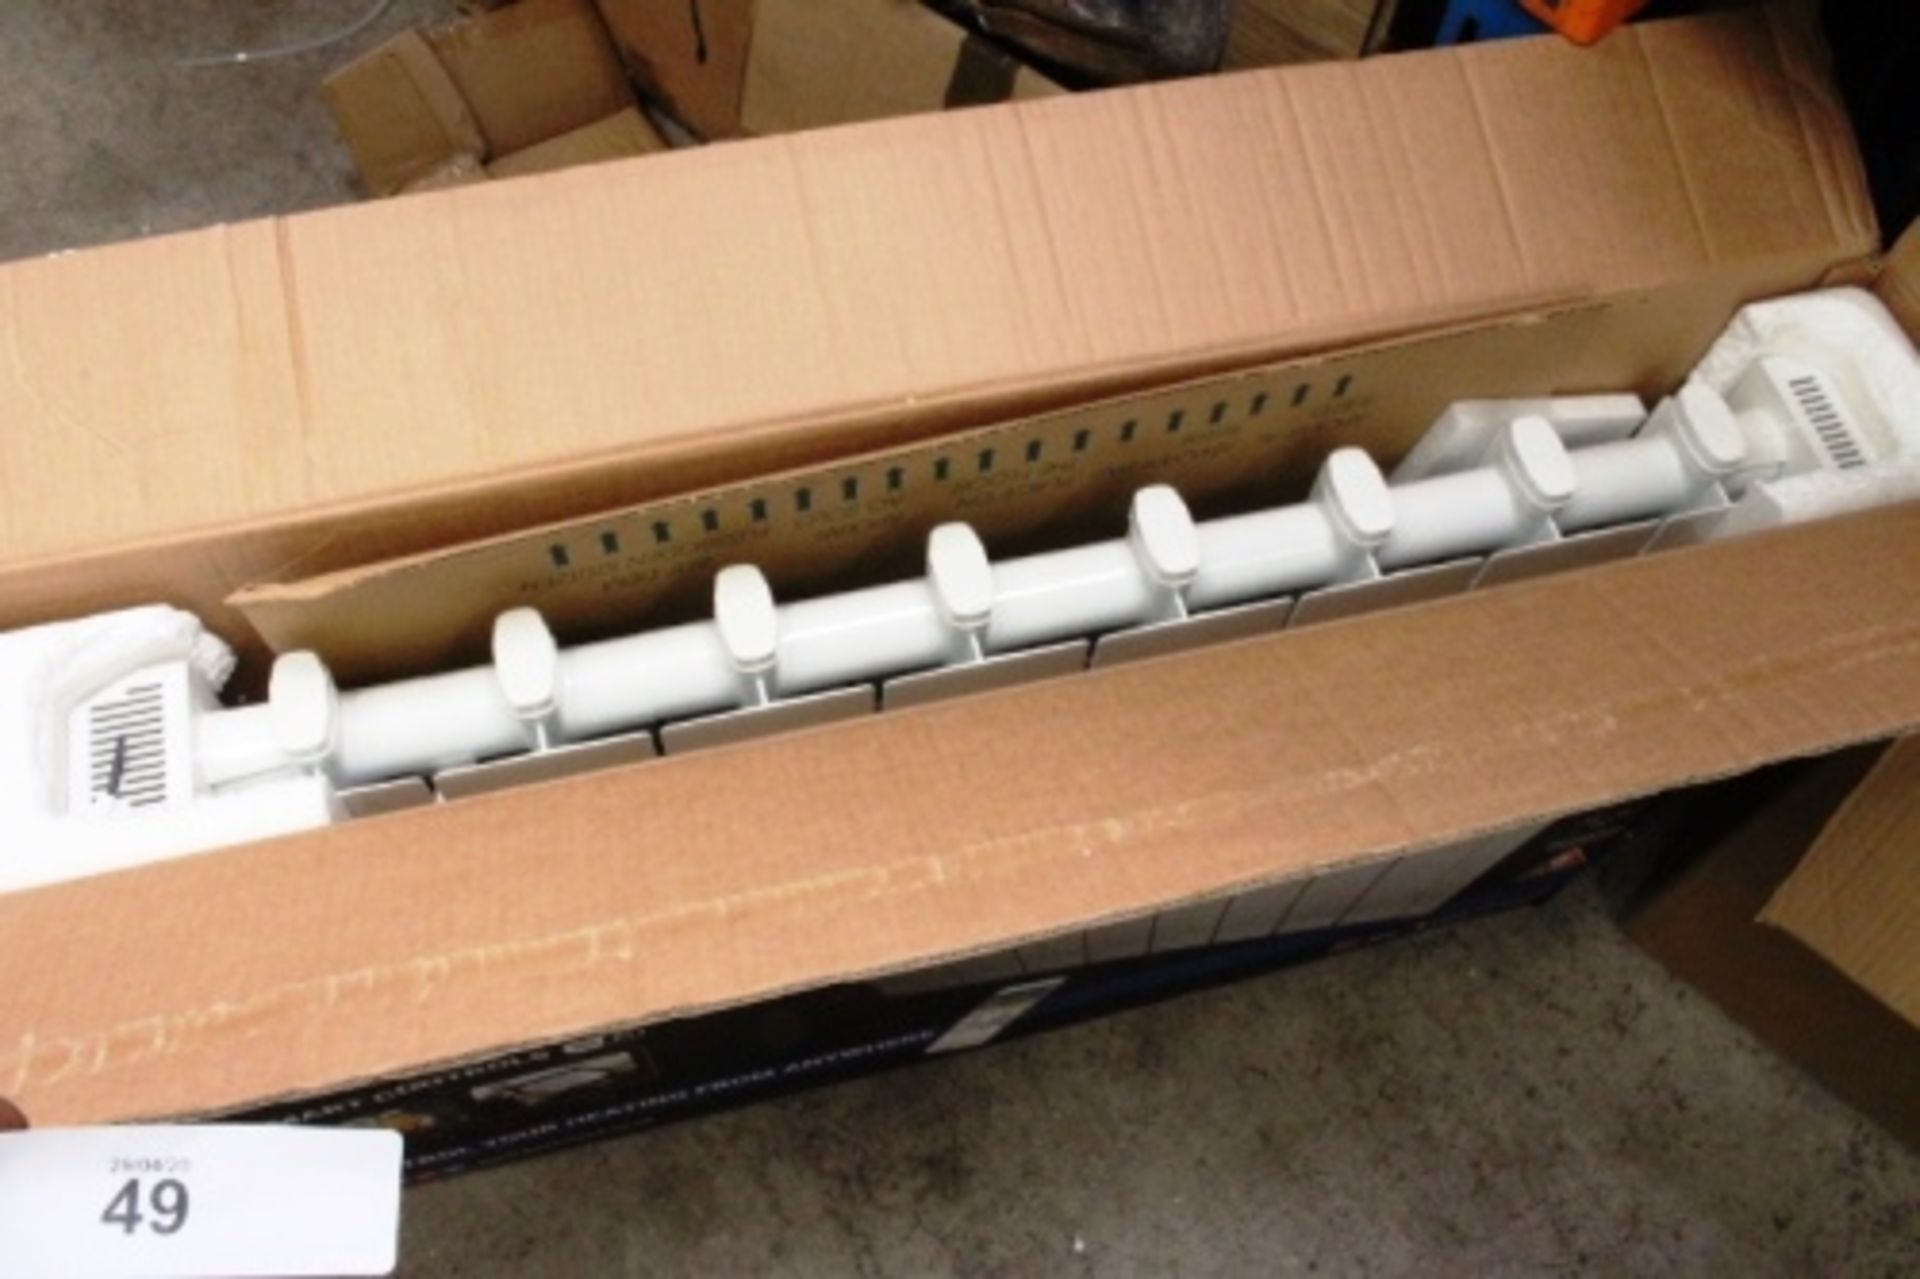 A Haverland self-programming electric radiator, ULTRAD-8, 1250W - New, untested (ES2) - Image 2 of 2